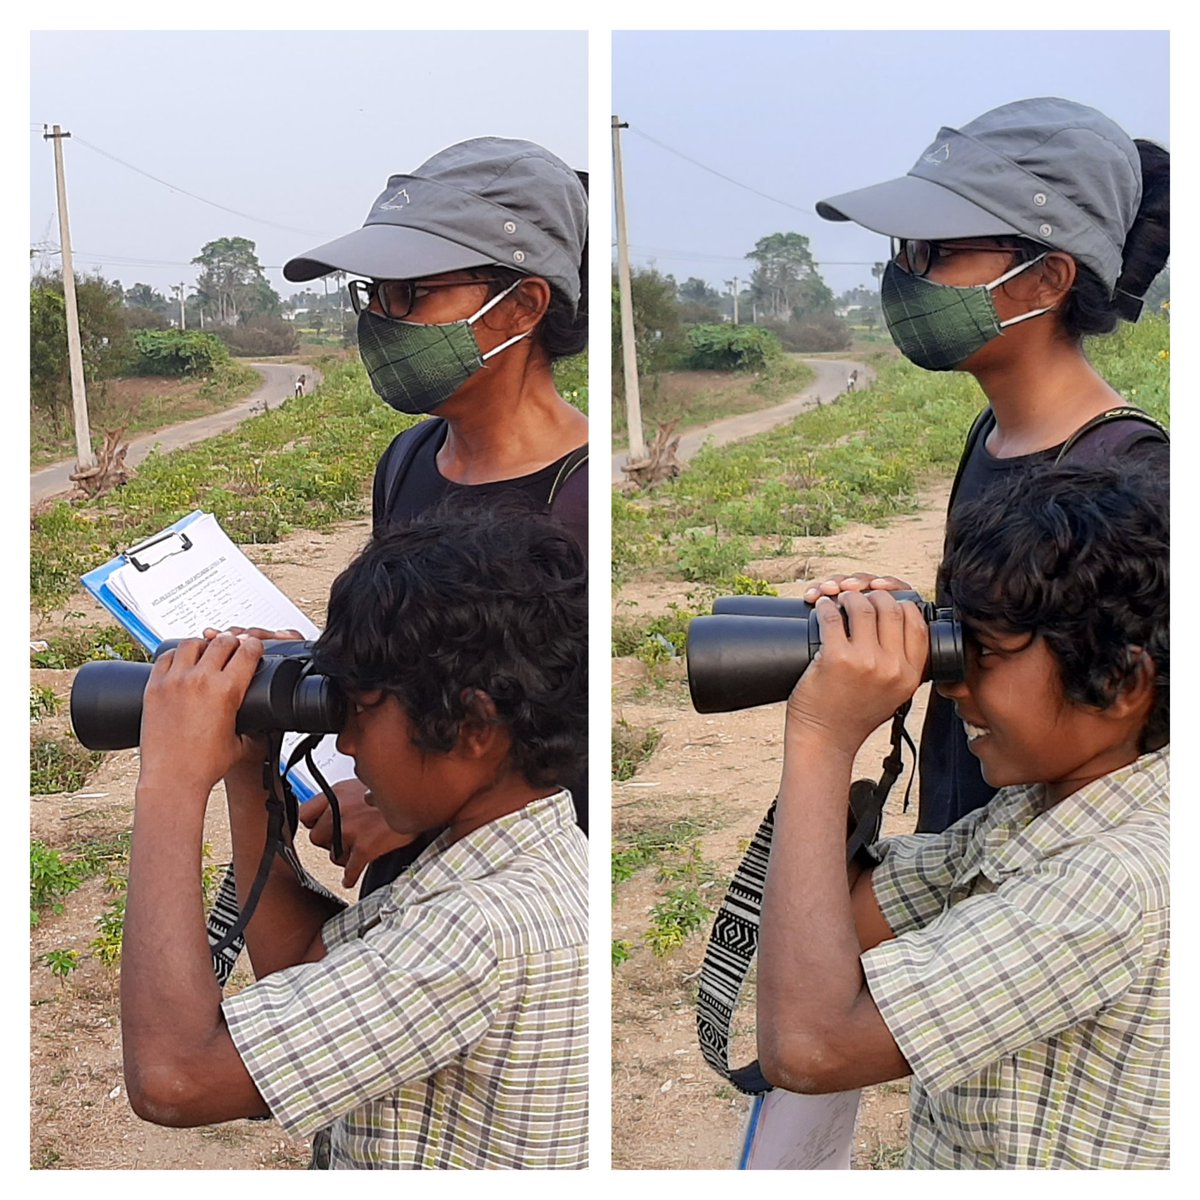 Look at his face before & after finding a flock of Cattle Egrets through binoculars! Bringing the smile on children's face through birds is what we work for!

#AWC2022 #asianwaterbirdcensus #wetlandsconservation #MomentsThatMatter #momentswelivefor #natureeducation #birdwatching